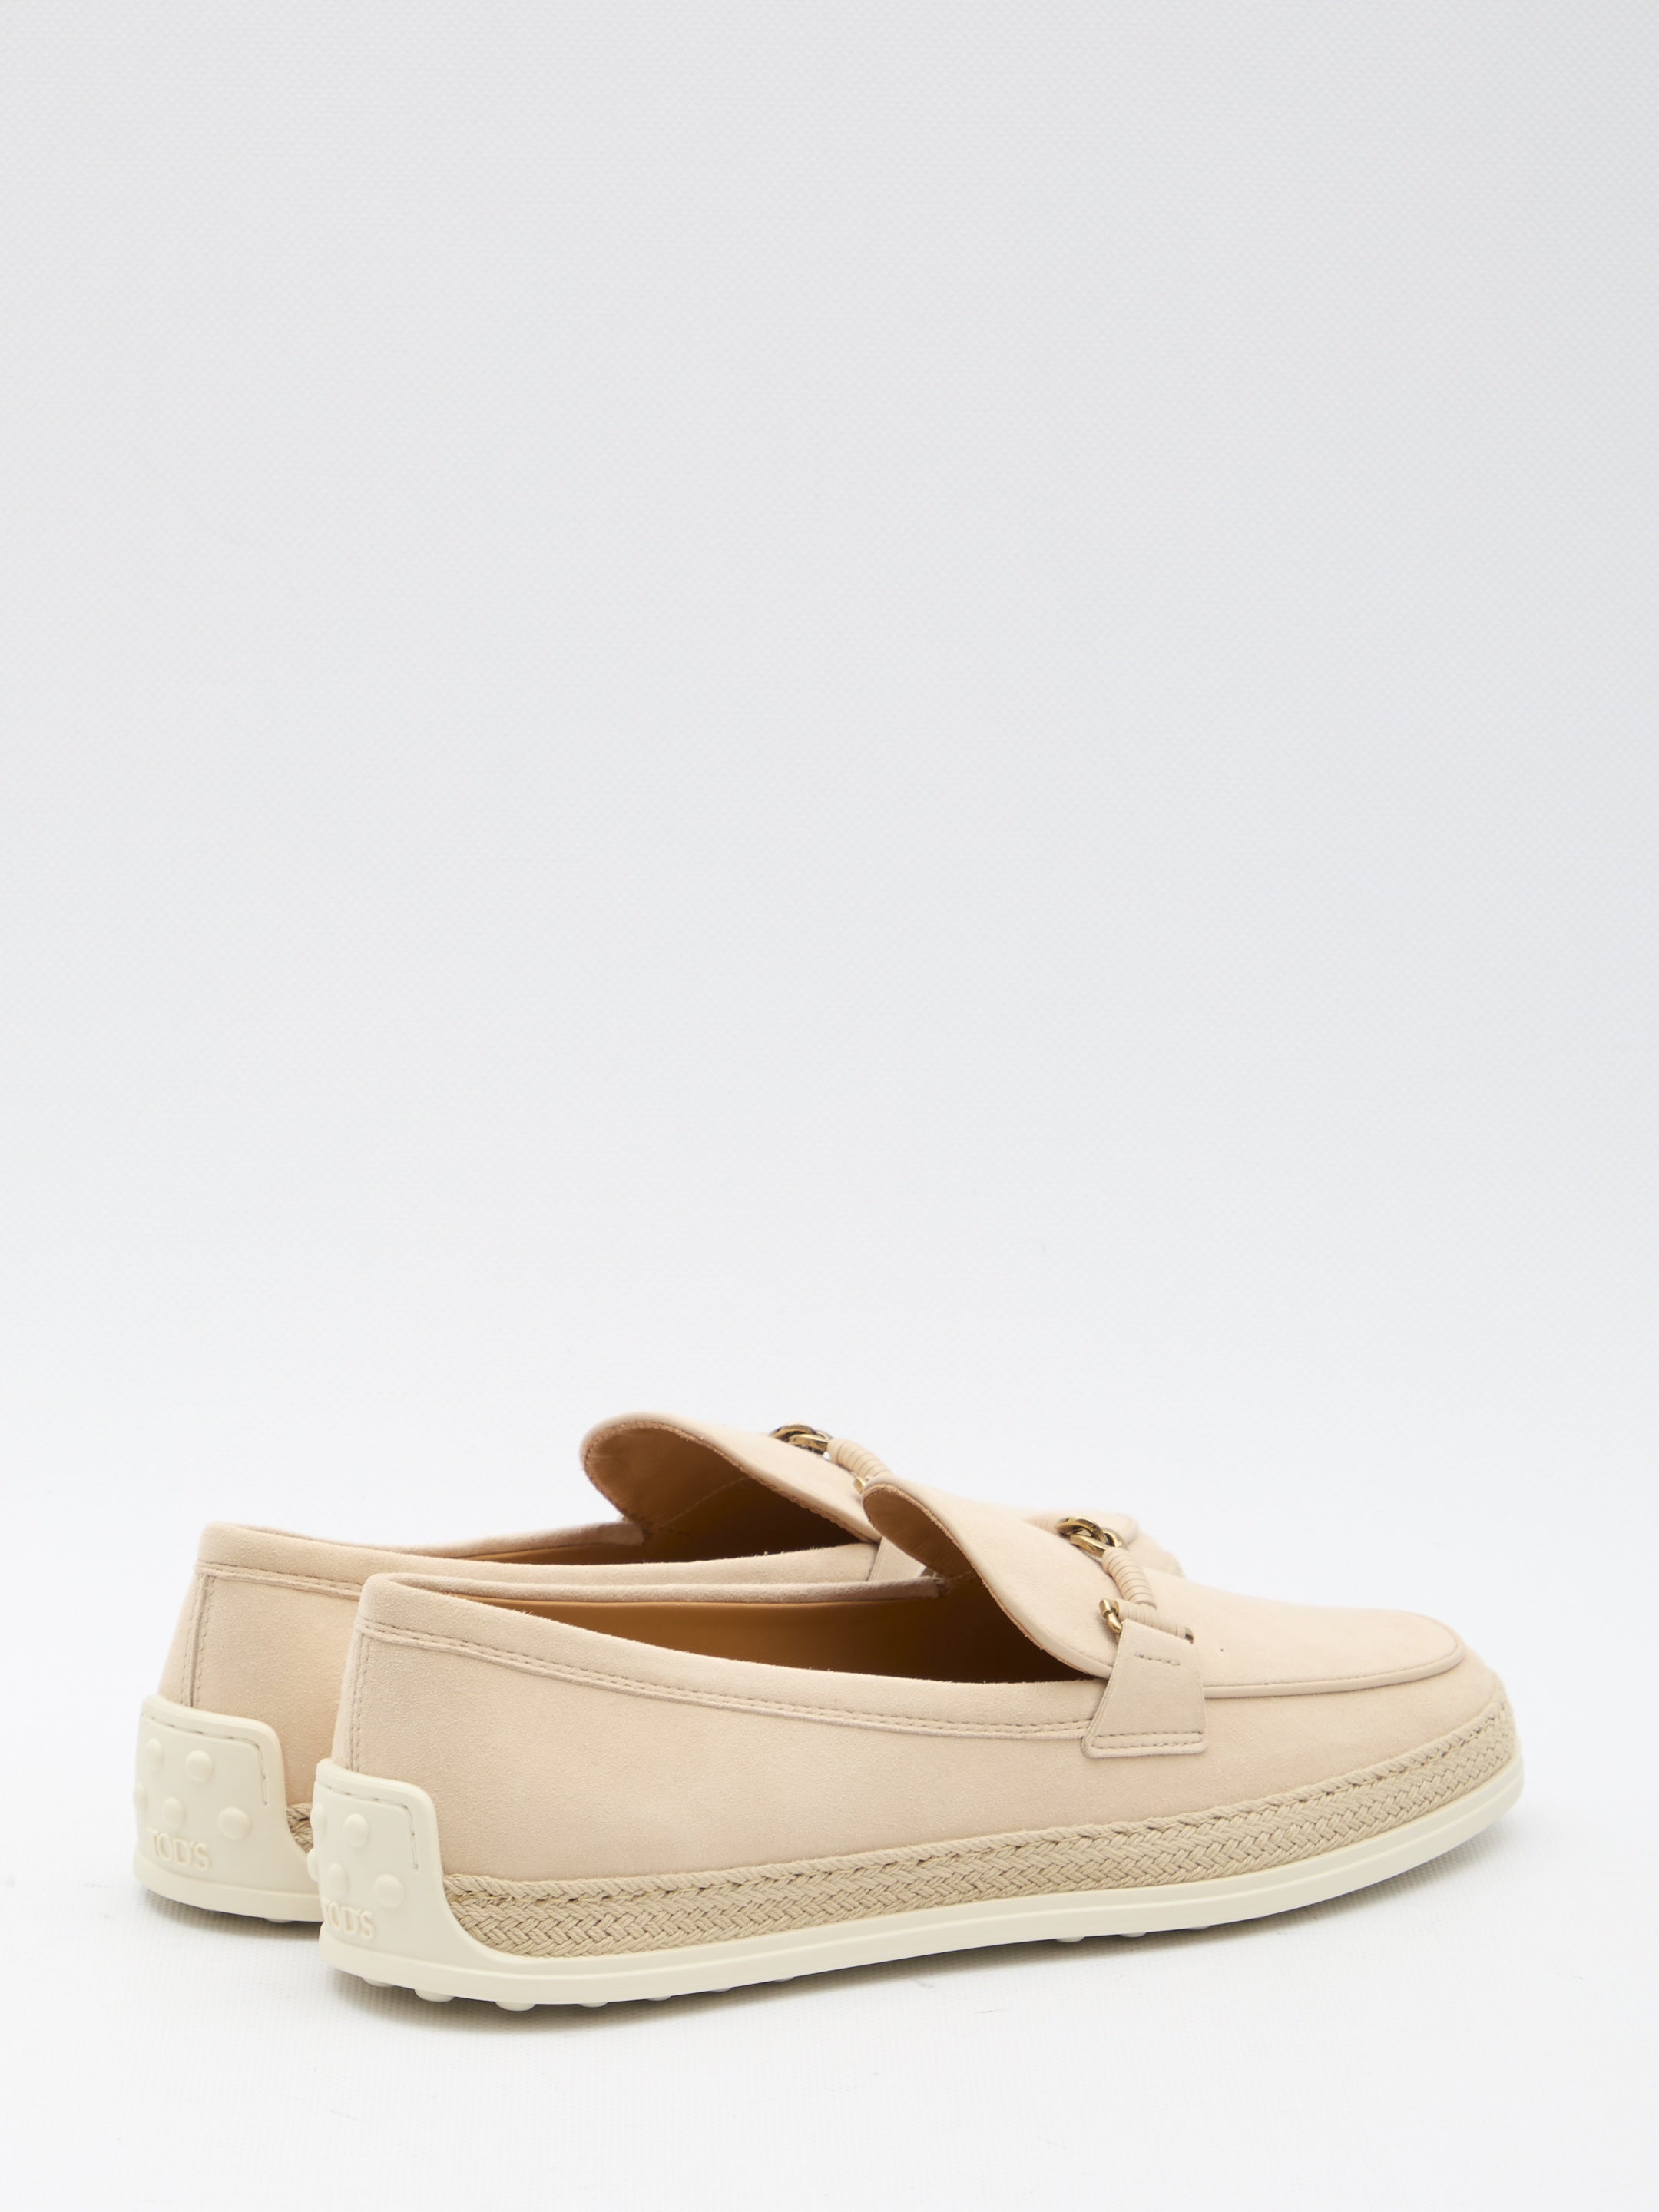 TODS-OUTLET-SALE-Suede-loafers-Flache-Schuhe-37-BEIGE-ARCHIVE-COLLECTION-3.jpg